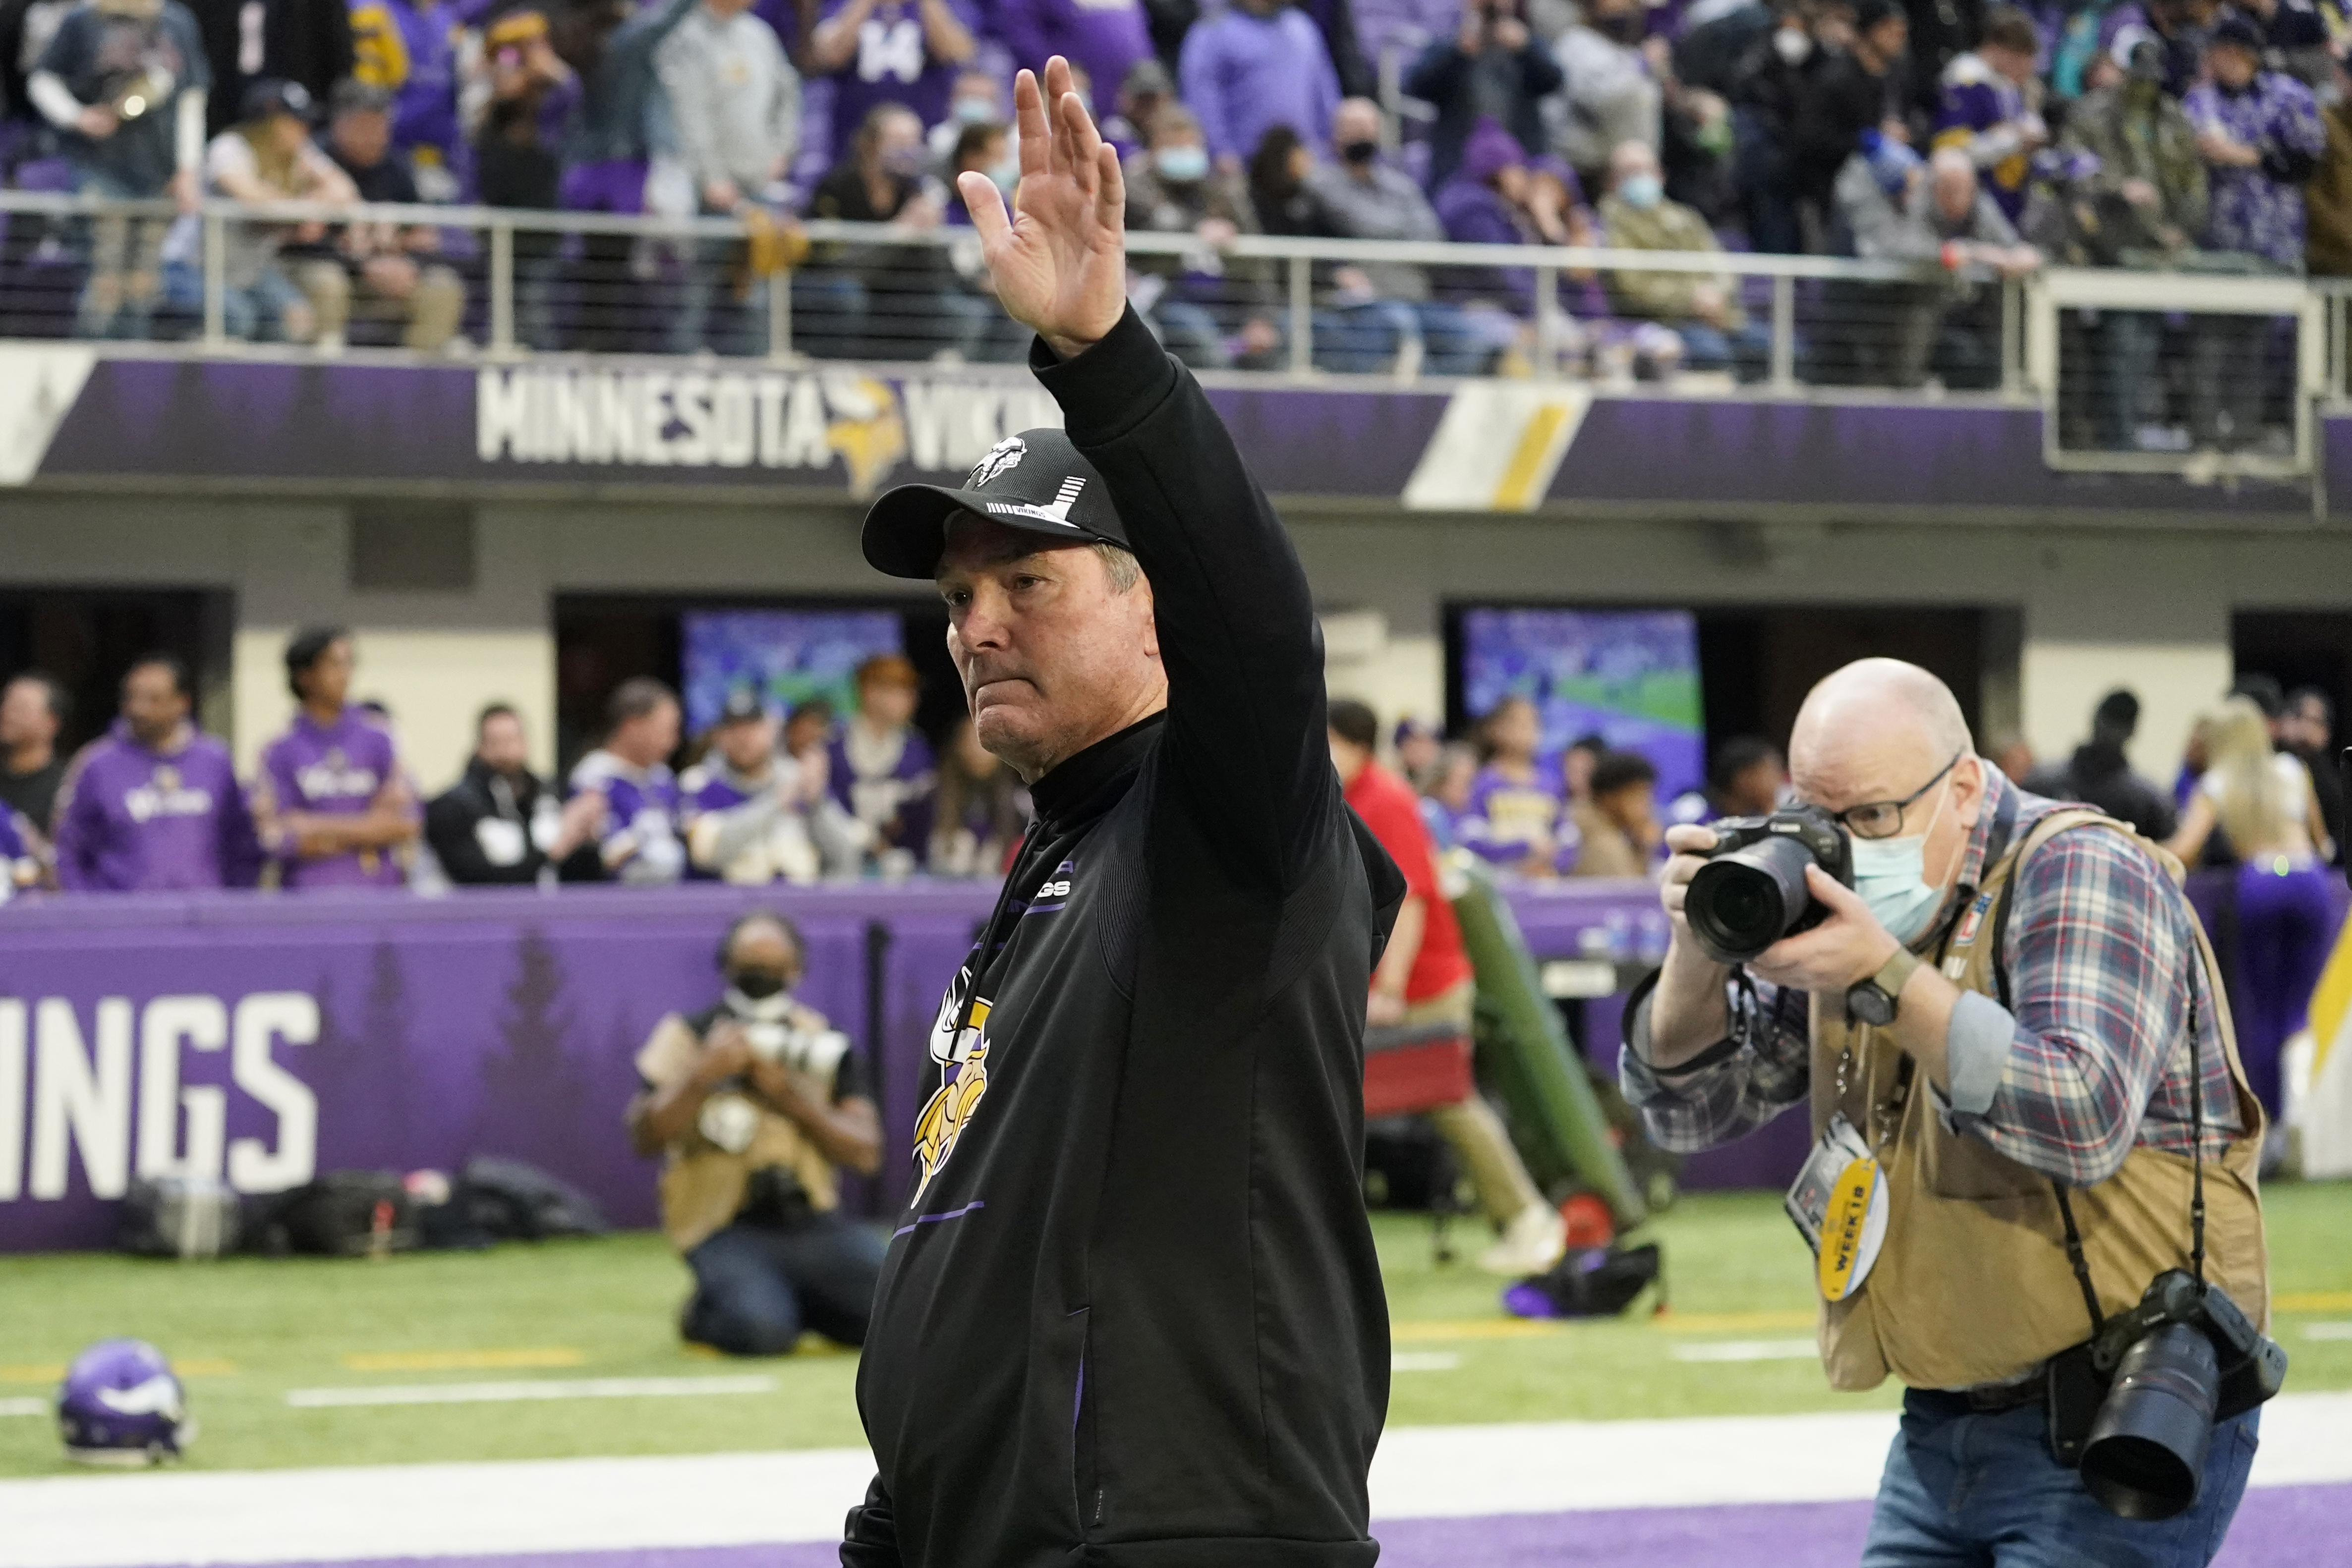 Vikings coach Zimmer to miss game tonight 